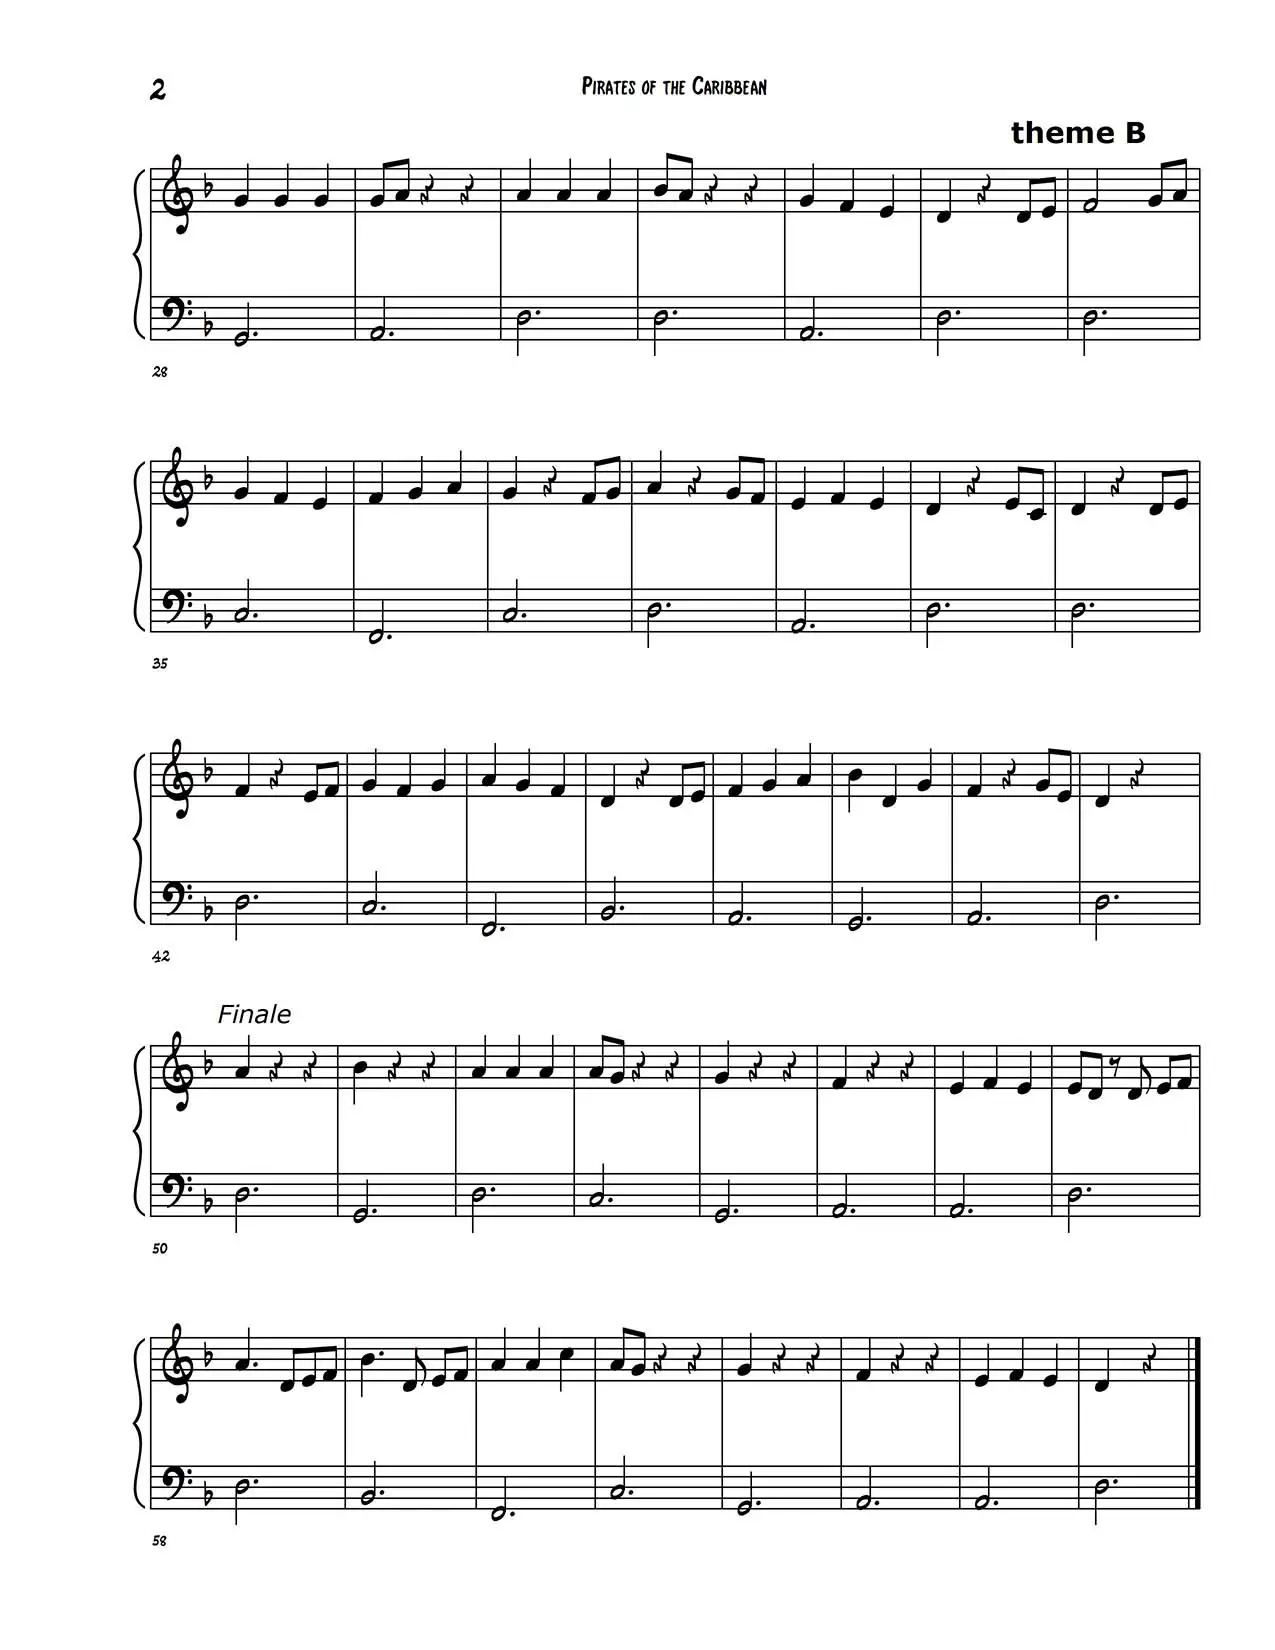 Pirates of the Caribbean full piano sheet music p.2 notes beginners pdf